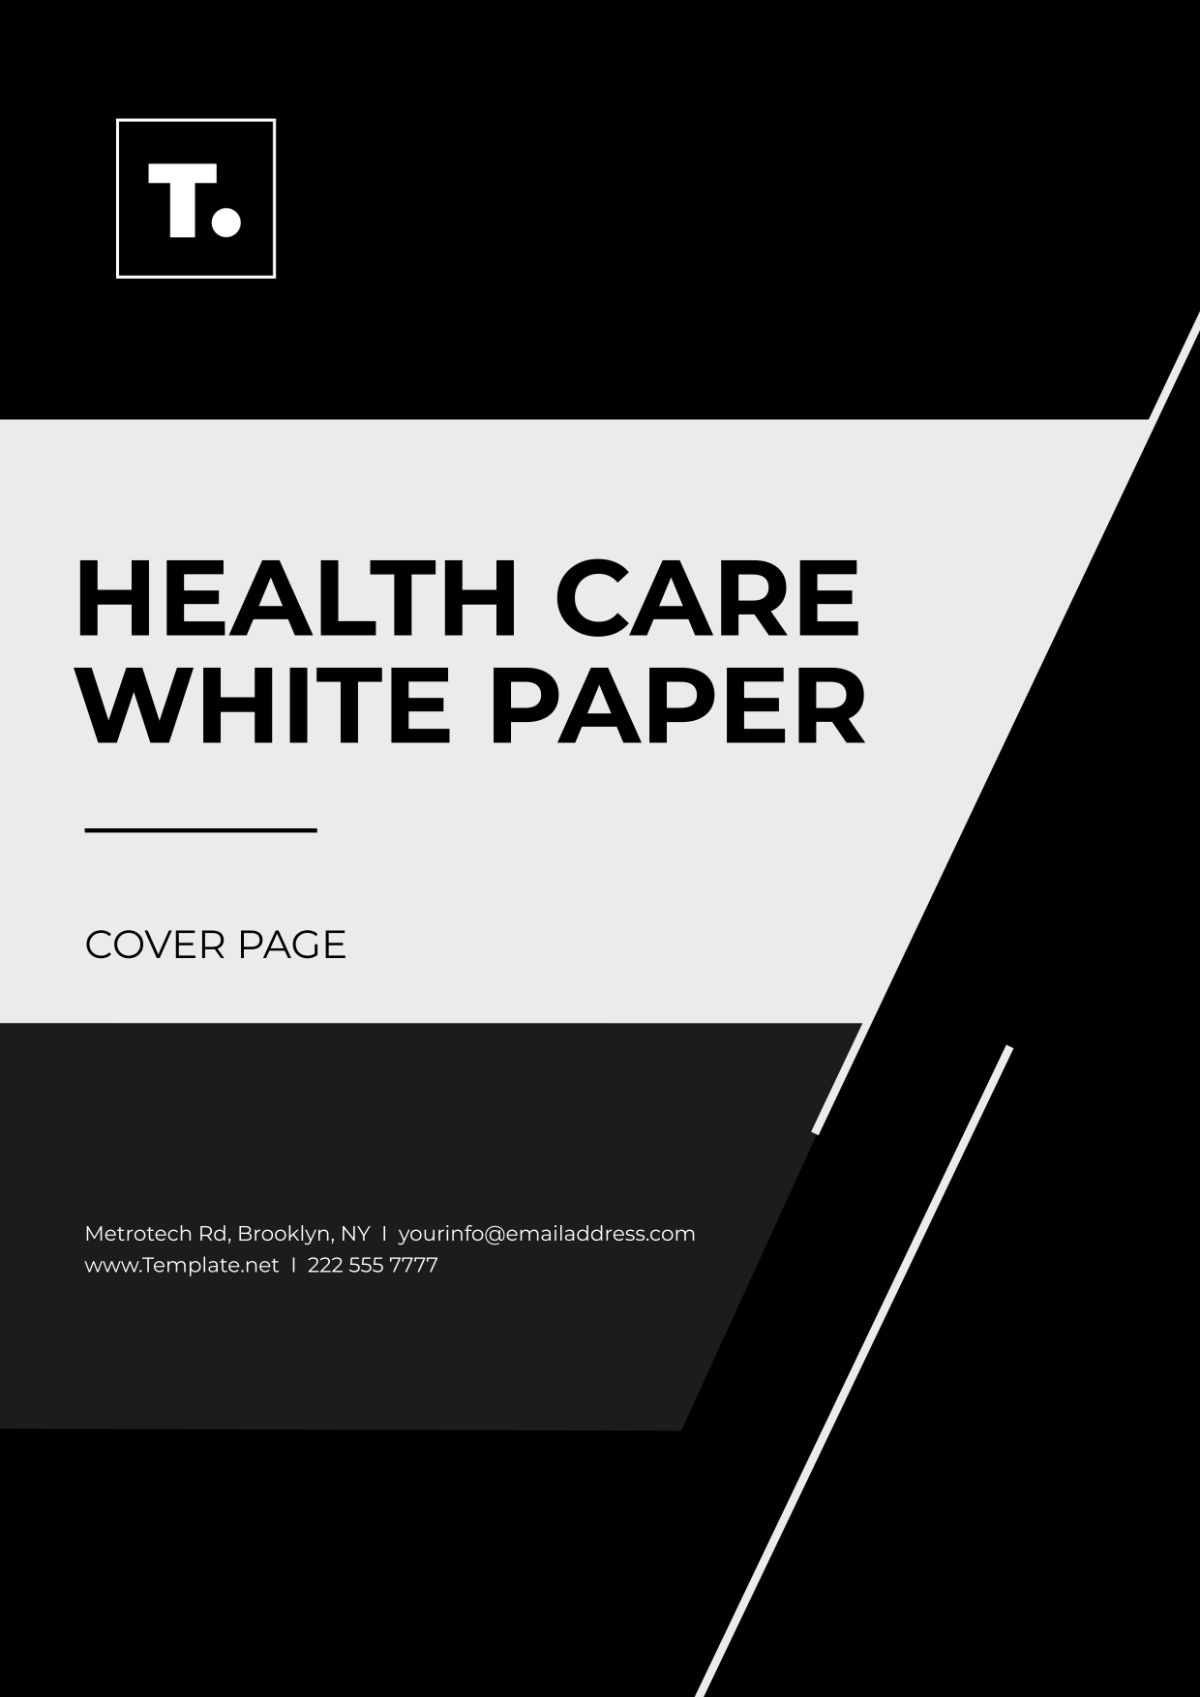 Healthcare White Paper Cover Page